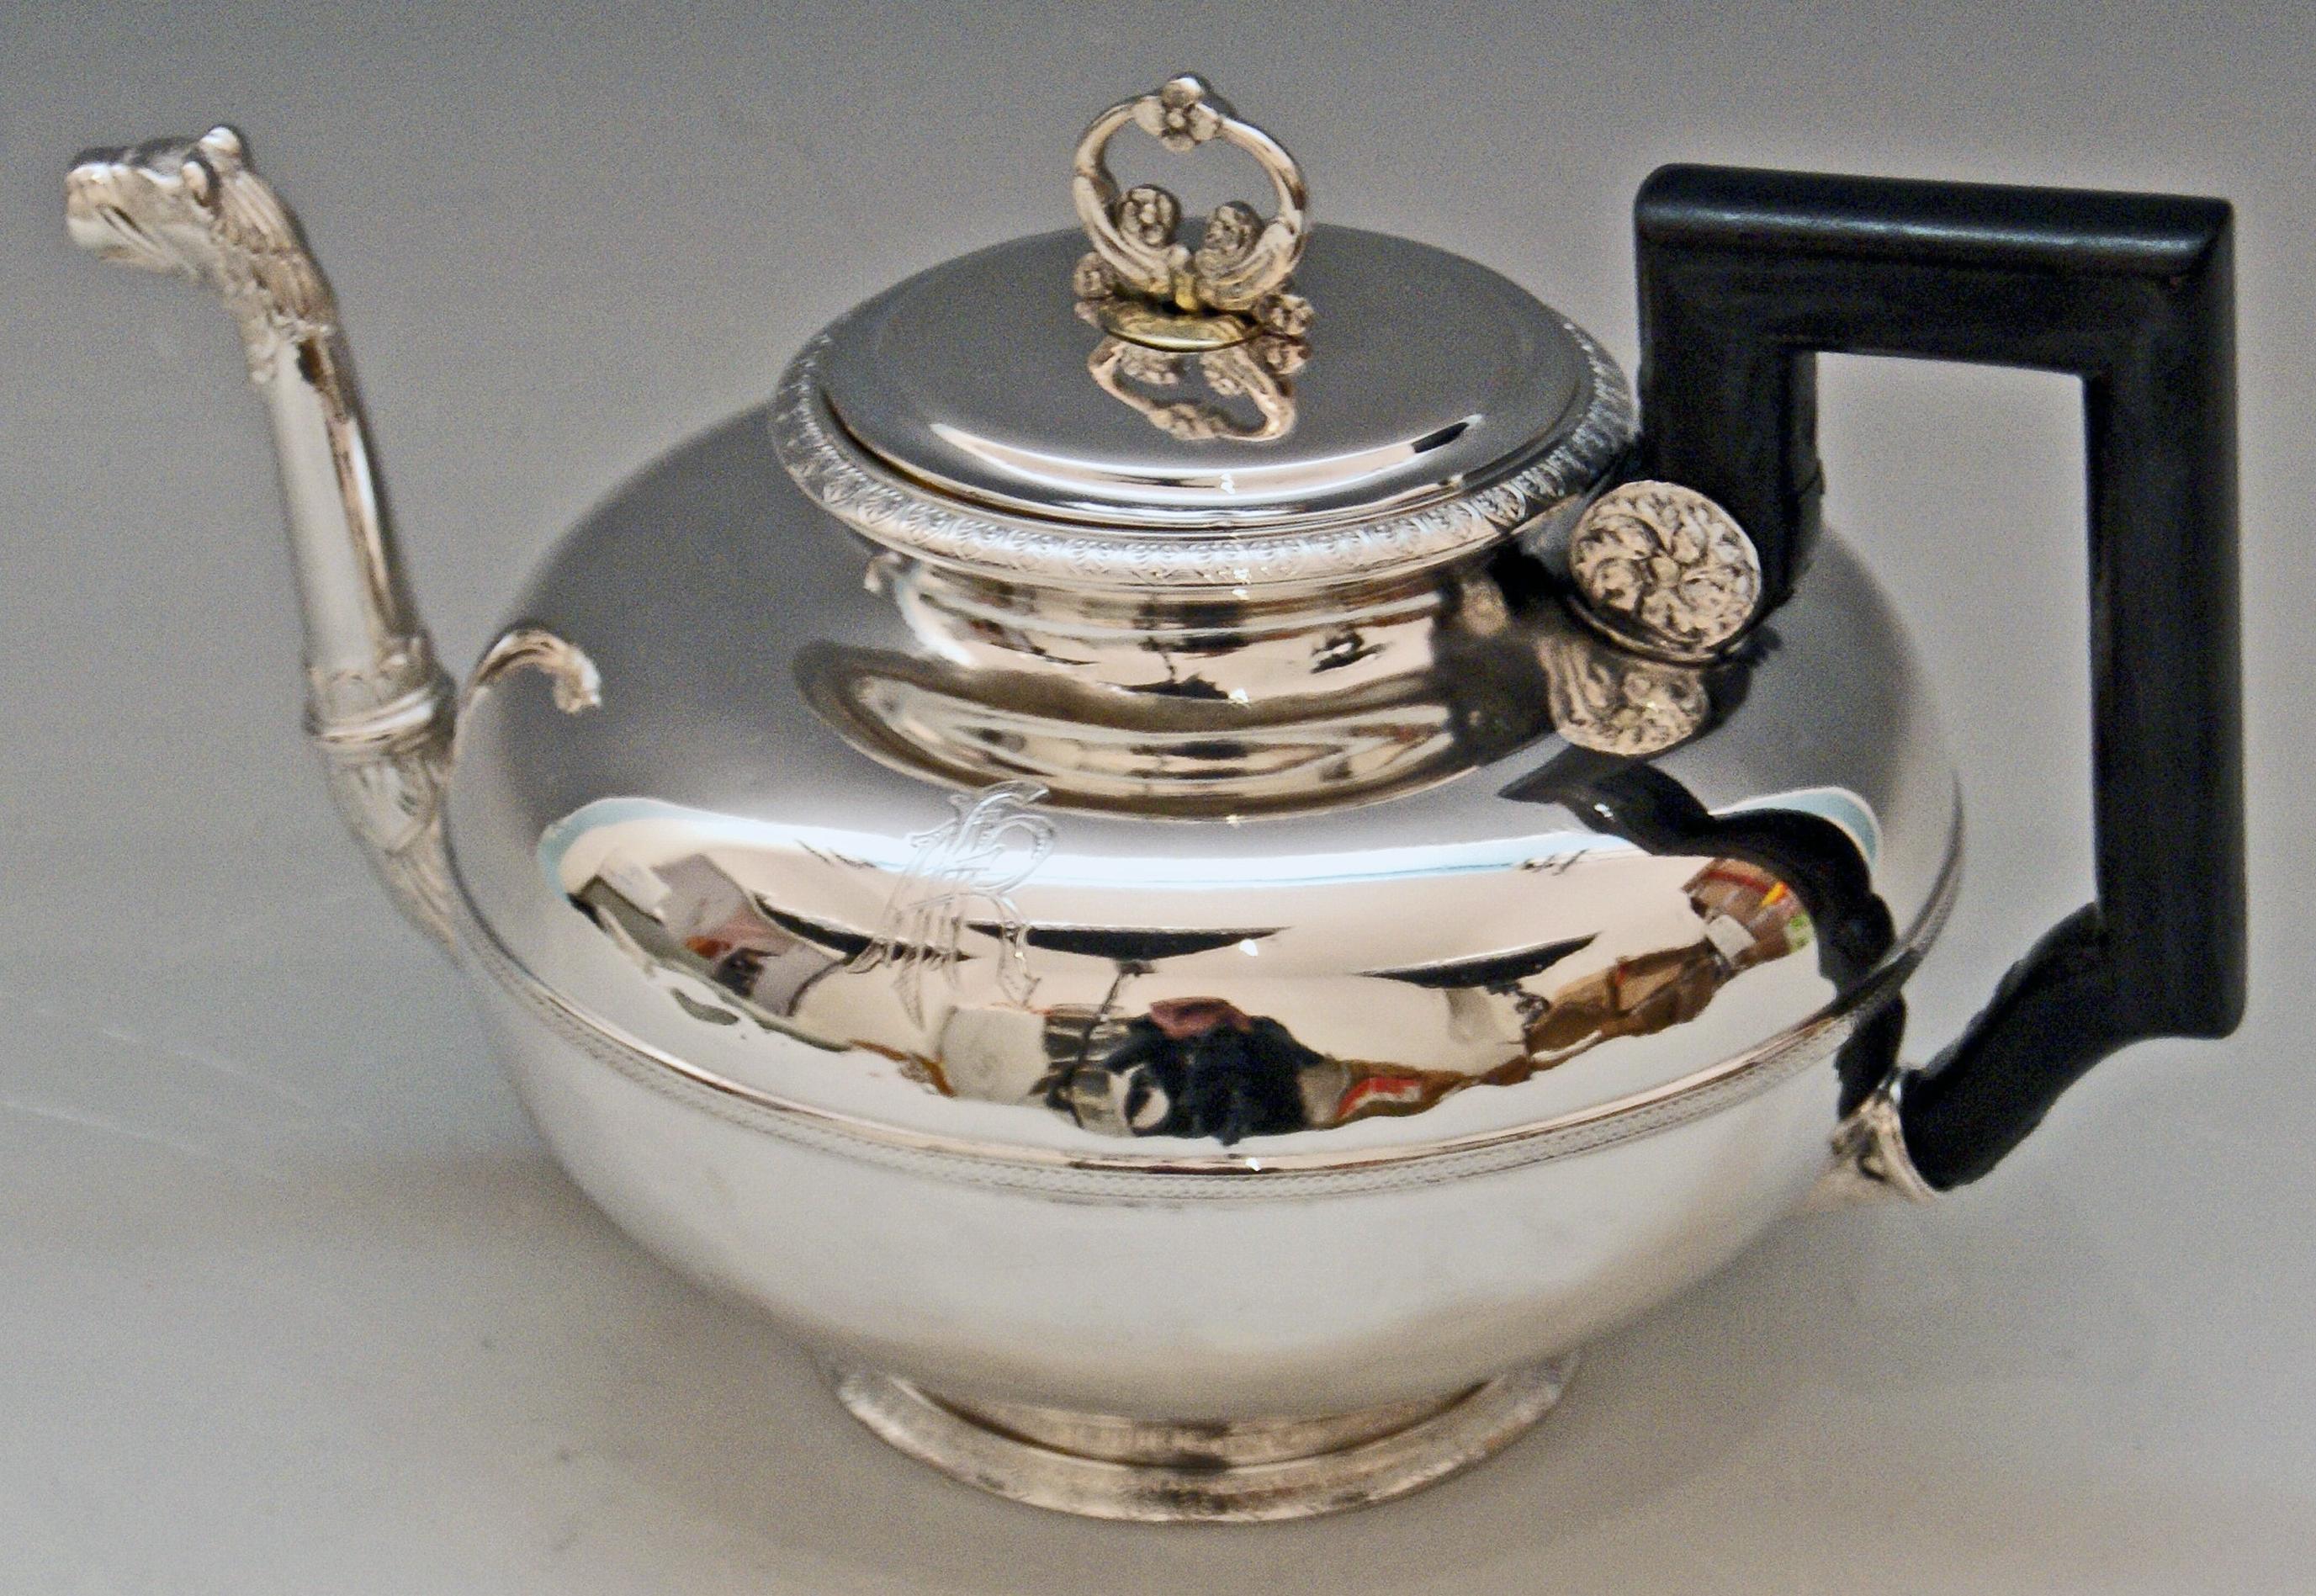 Silver Austrian gorgeous tea pot of elegant appearance:
Manufactured 1829 / Biedermeier period.

The pot is manufactured in most elegant Biedermeier style:
Tea pot's form is of bellied as well as of tapering type having smooth surface / the